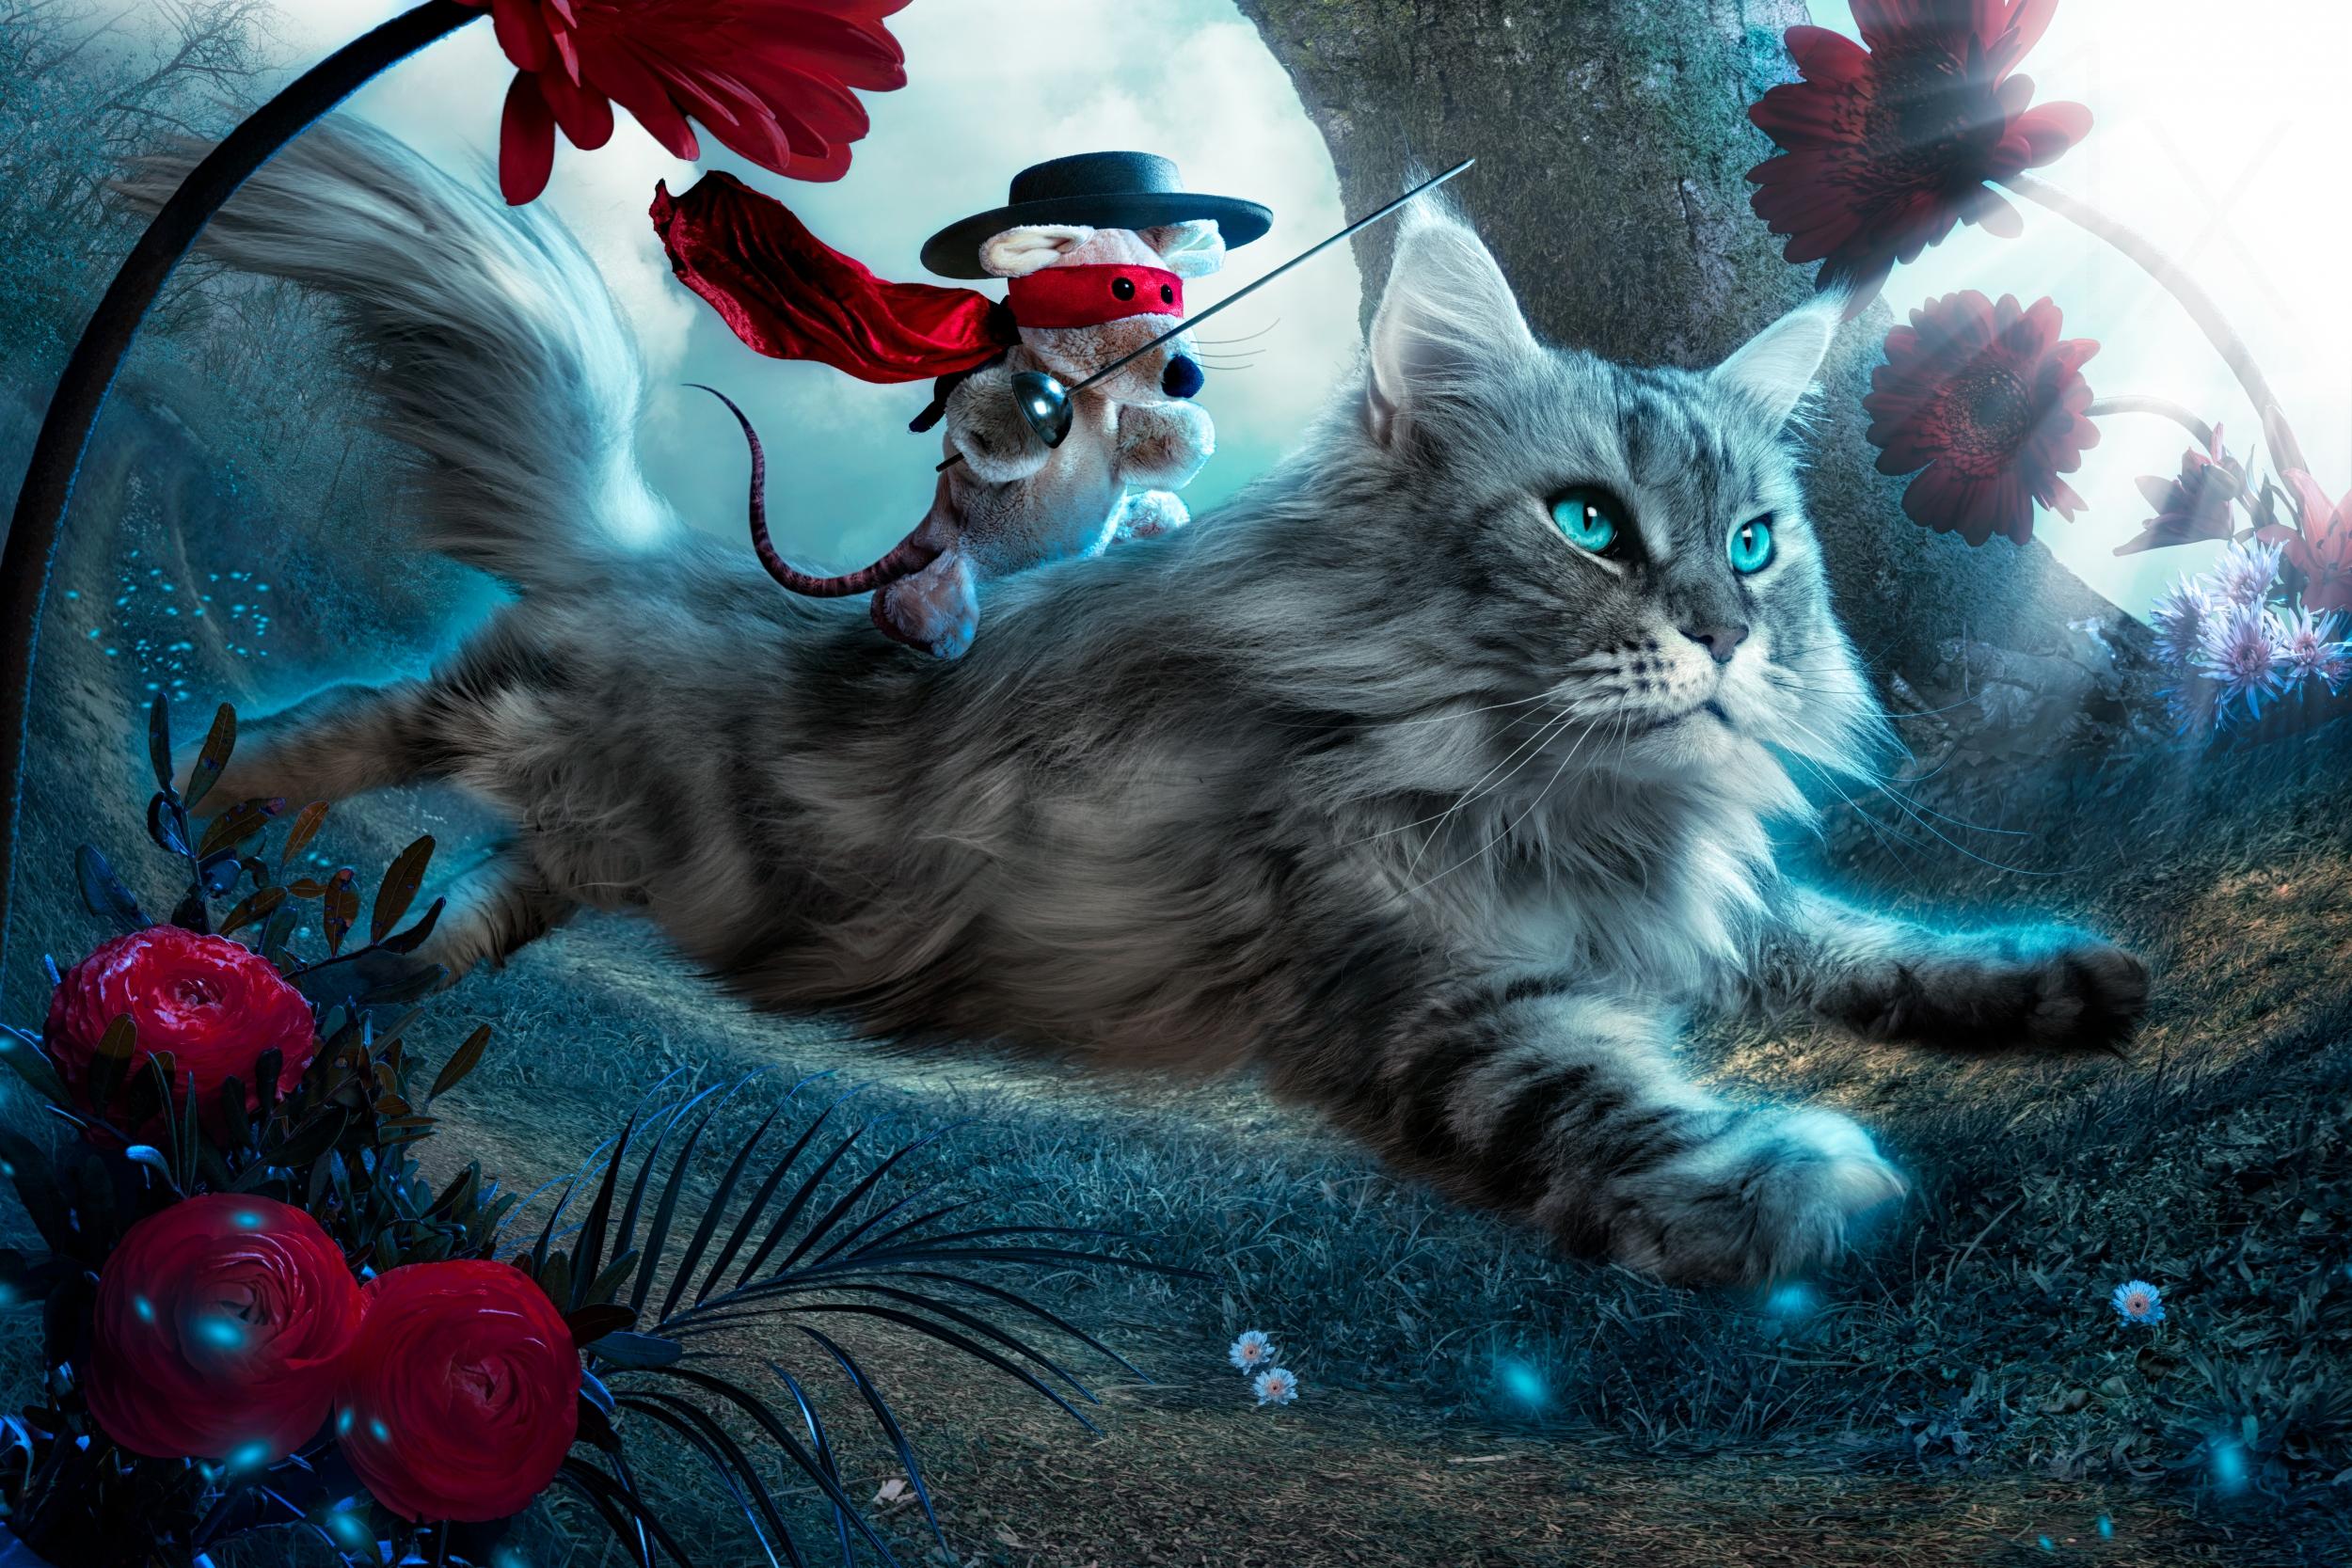 cat and her knight HD Wallpaper | Background Image | 2500x1667 | ID